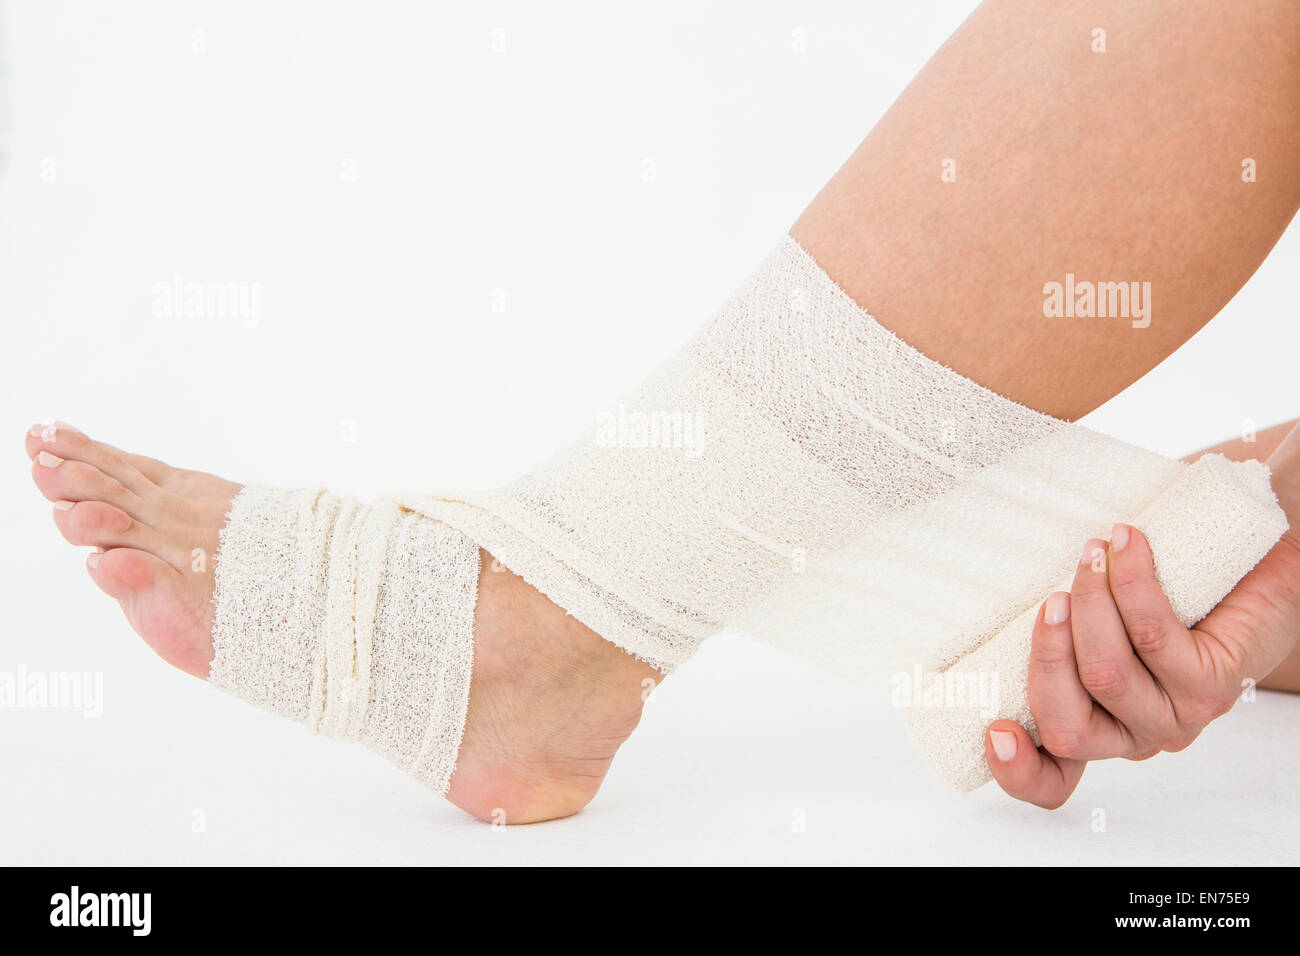 Sitting woman banding her ankle Stock Photo